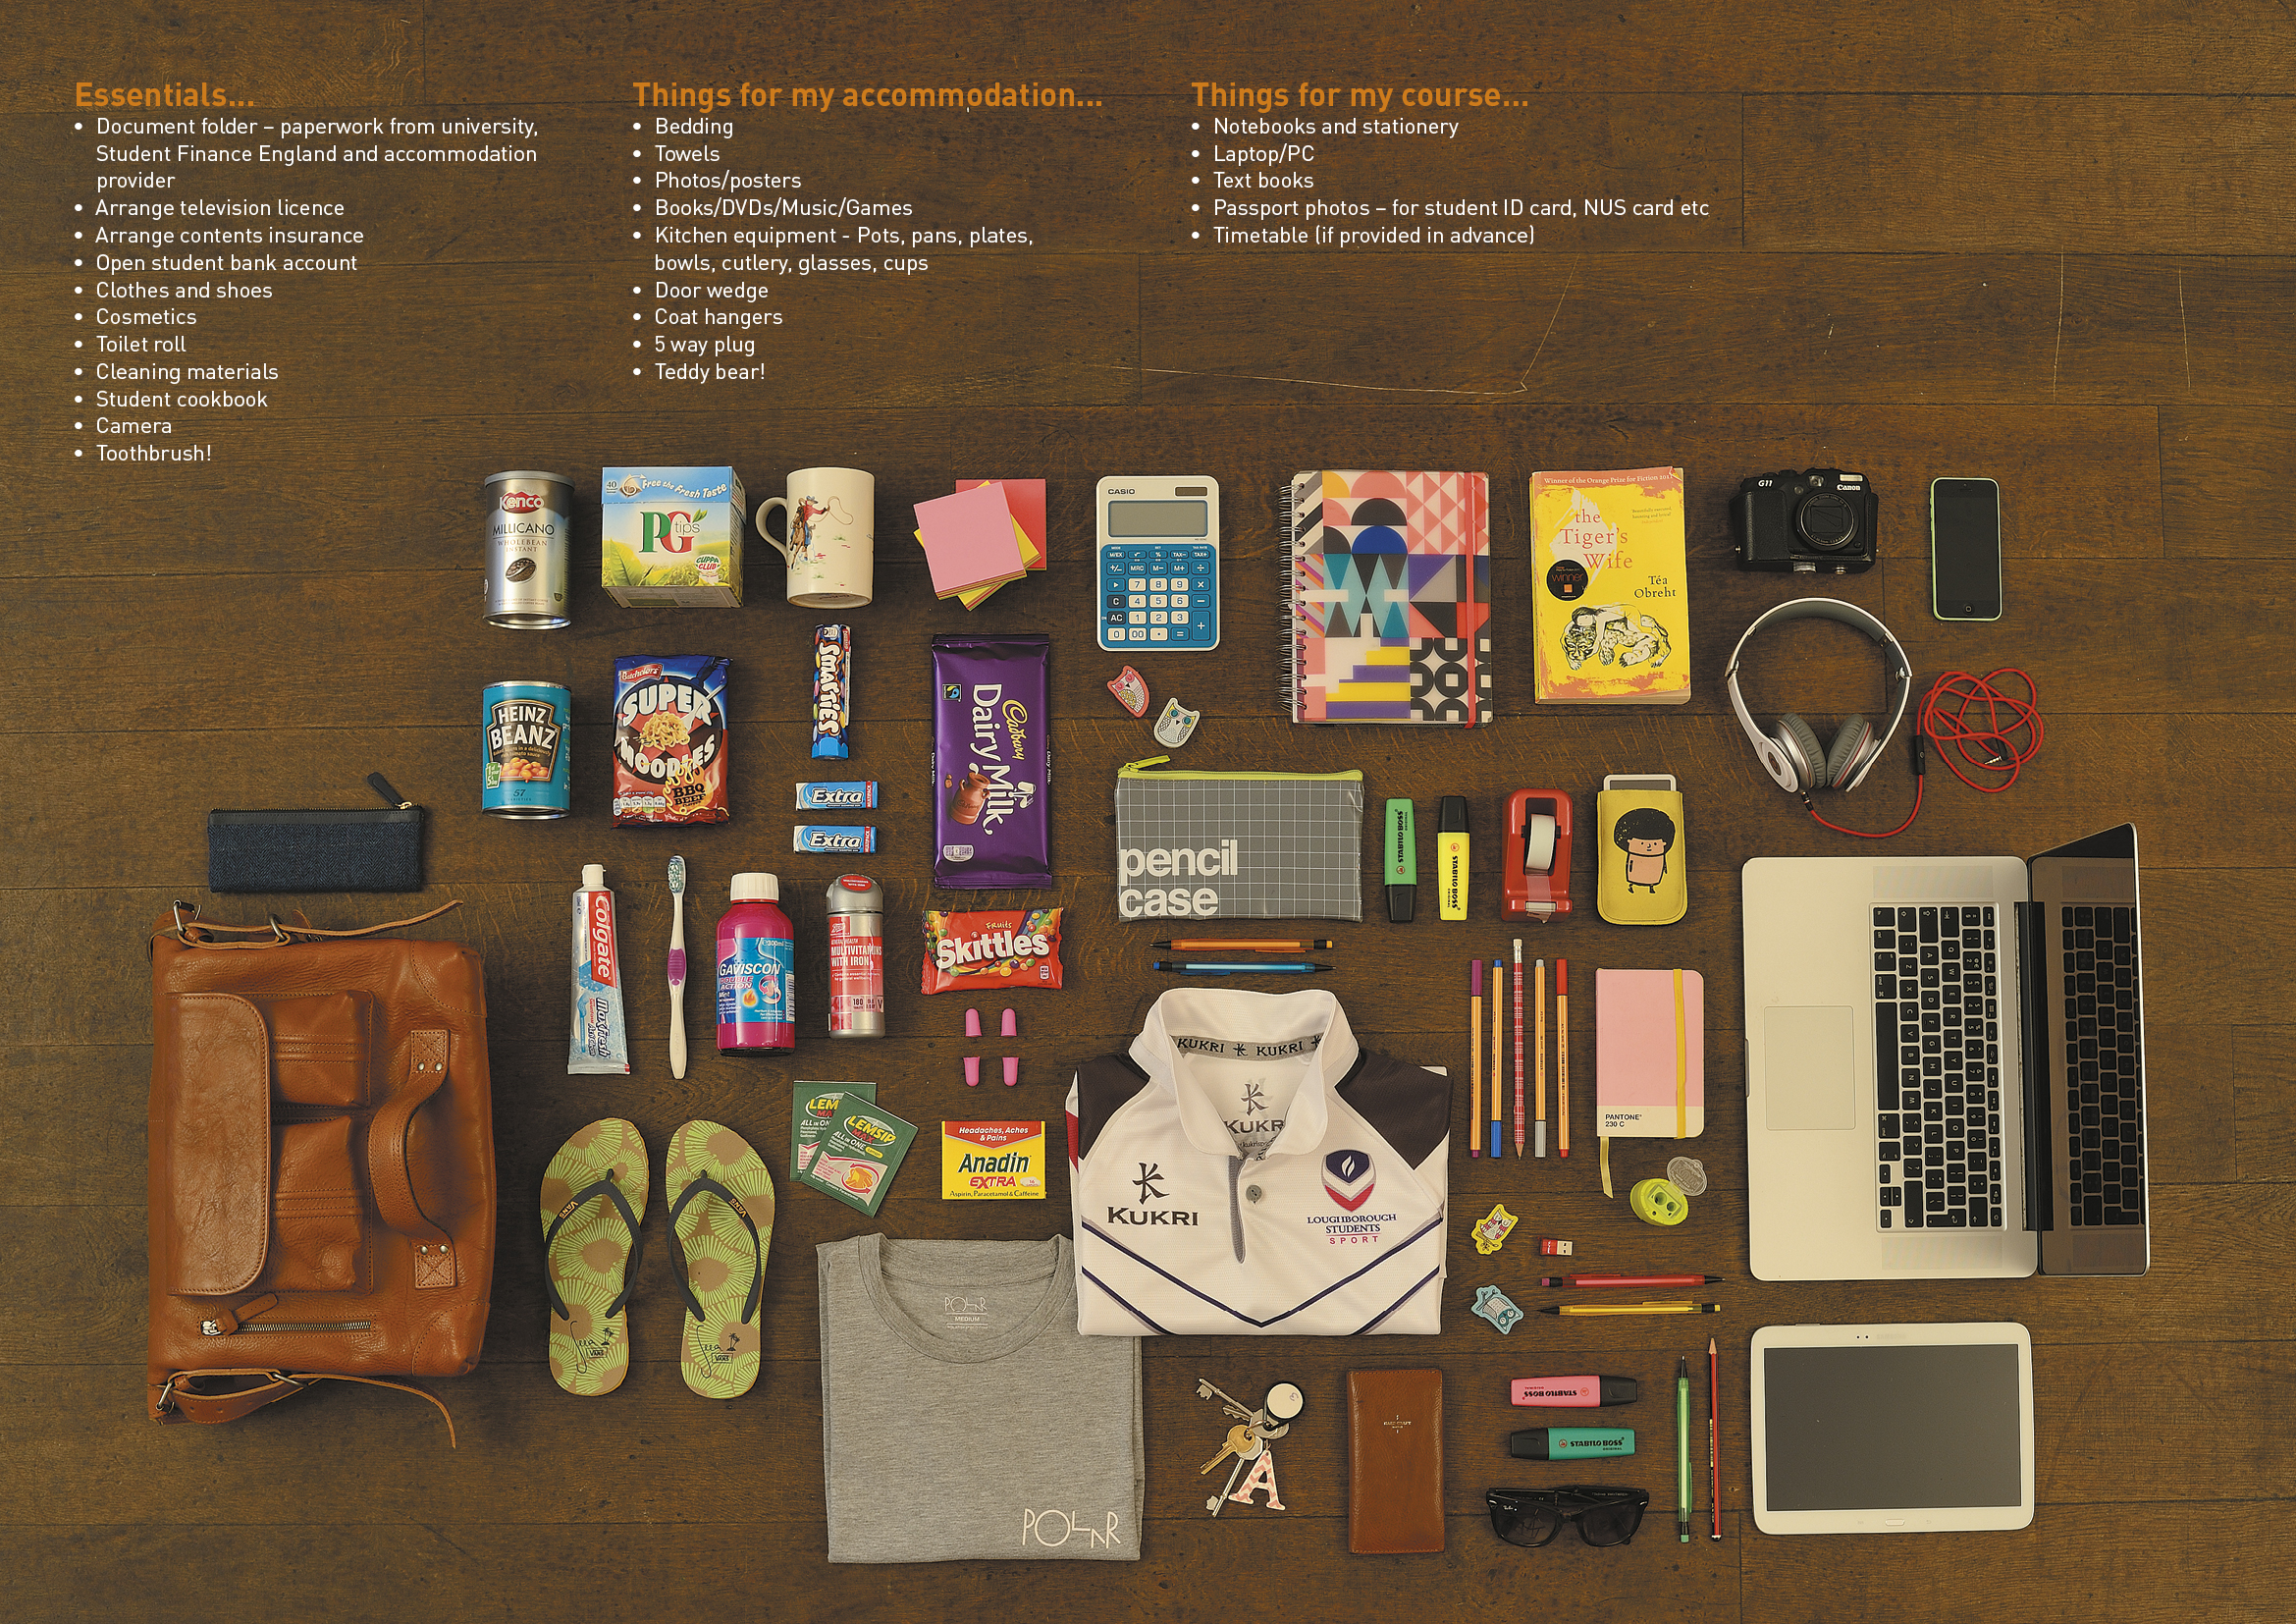 List of items that students could bring to university, with some of the items placed on a floor together. 